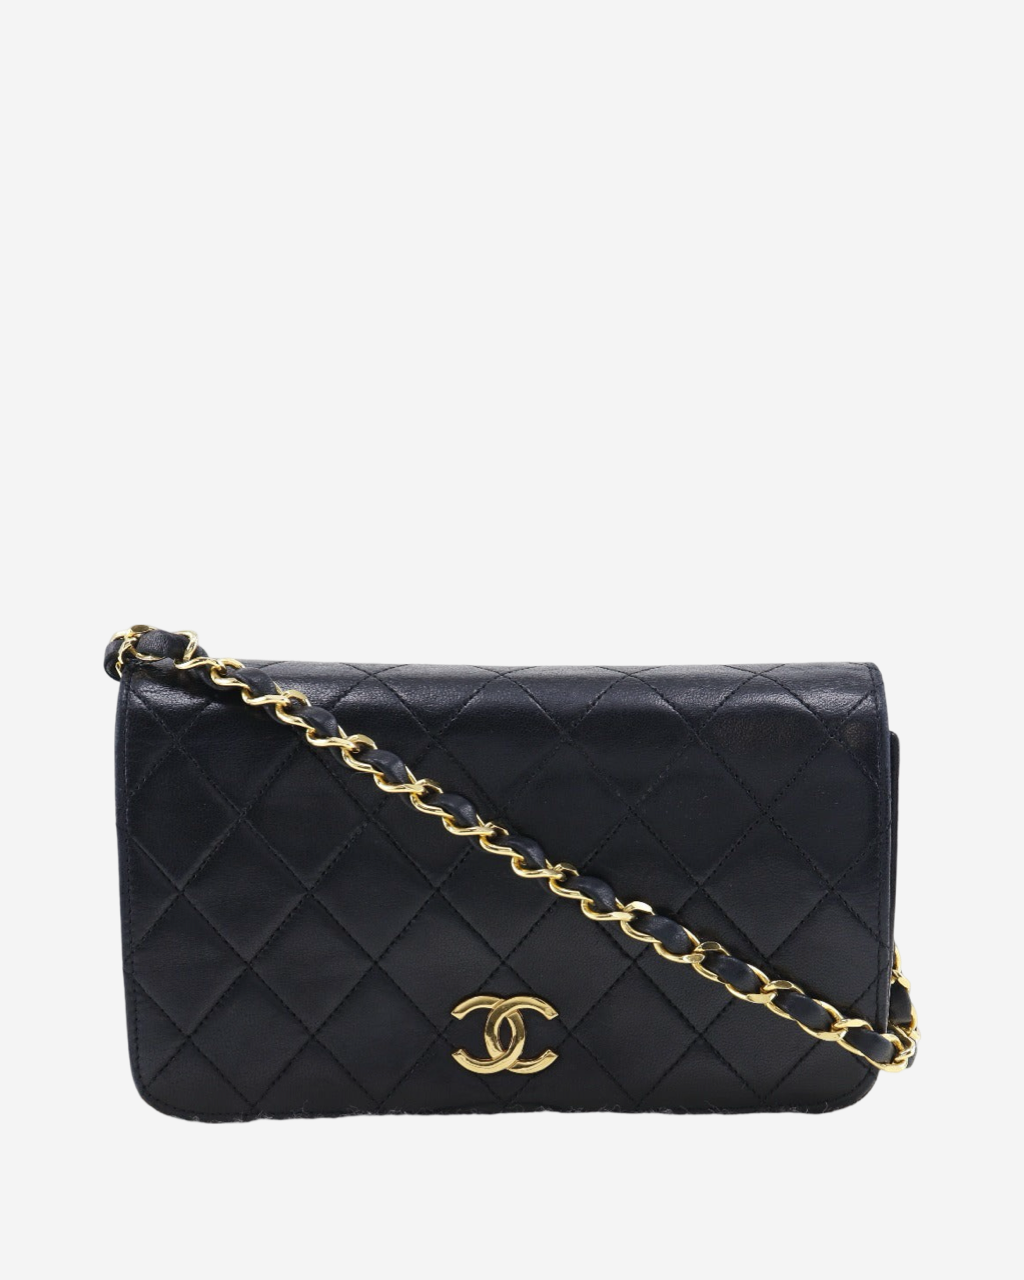 Chanel Wallet on Chain Bag